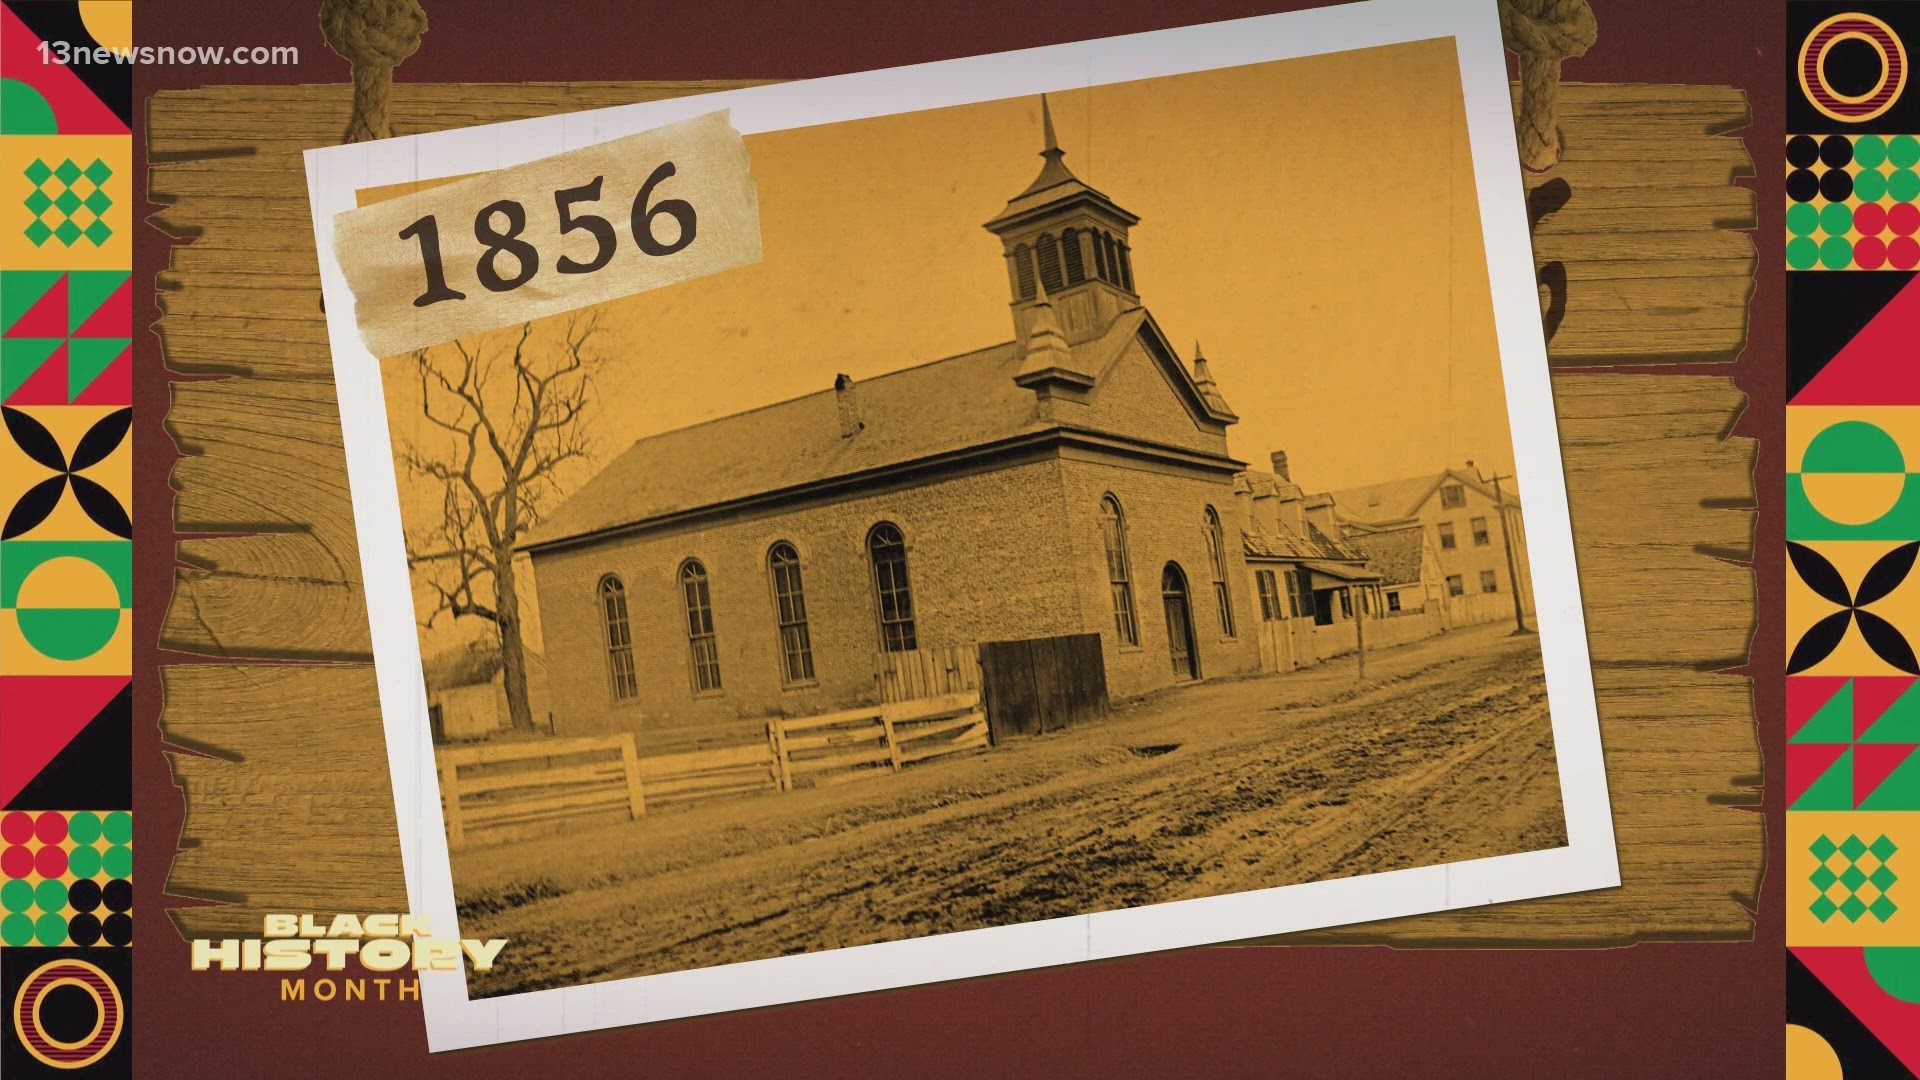 How both slaves and free Black people came together to start what is now known as one of the first Black churches in the country.